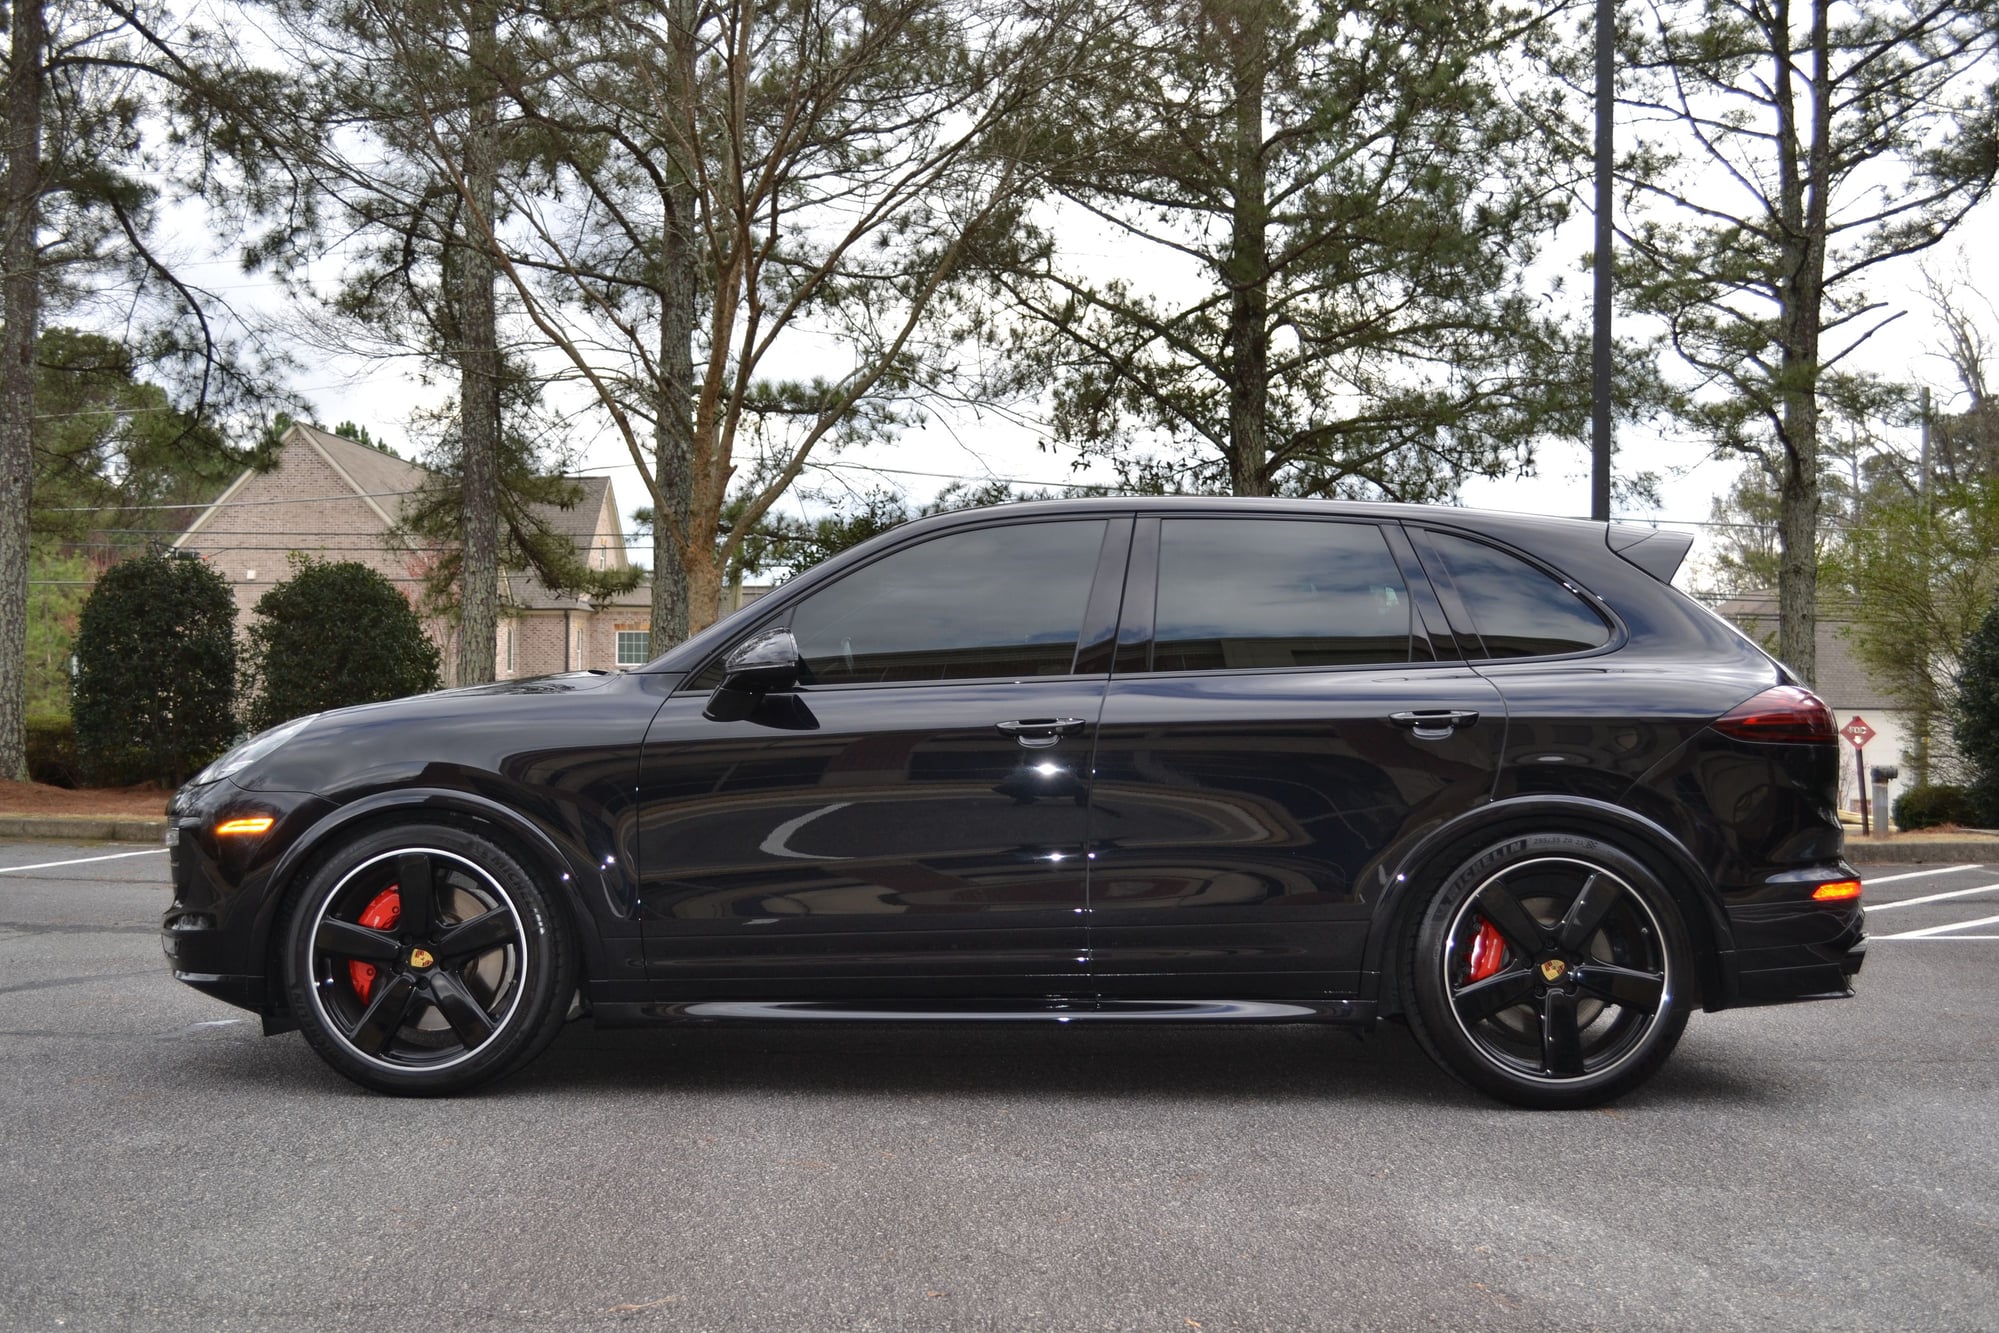 2017 Porsche Cayenne - 2017 Porsche Cayenne Turbo, only 45k miles, $150k MSRP, loaded w/options, immaculate! - Used - VIN WP1AC2A27HLA92983 - 45,000 Miles - 8 cyl - AWD - Automatic - SUV - Black - Duluth, GA 30097, United States